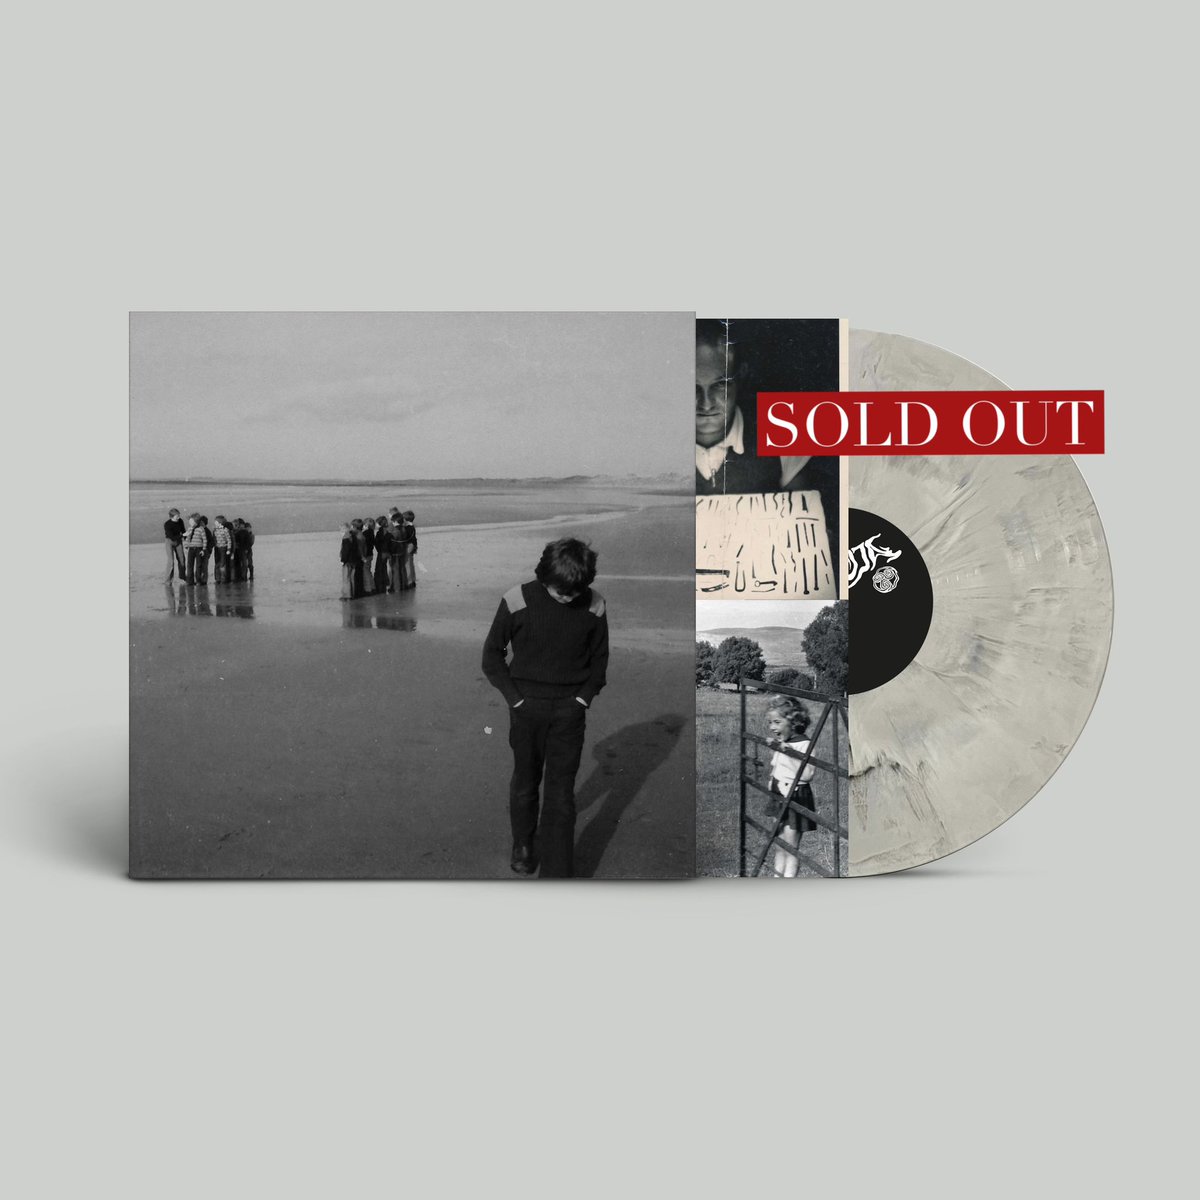 Madness. In less than 24hrs the Limited Edition Gatefolds of Connla’s Well have sold out As has the re-press of Knocknarea! (These vinyls will still be available on our upcoming tour)